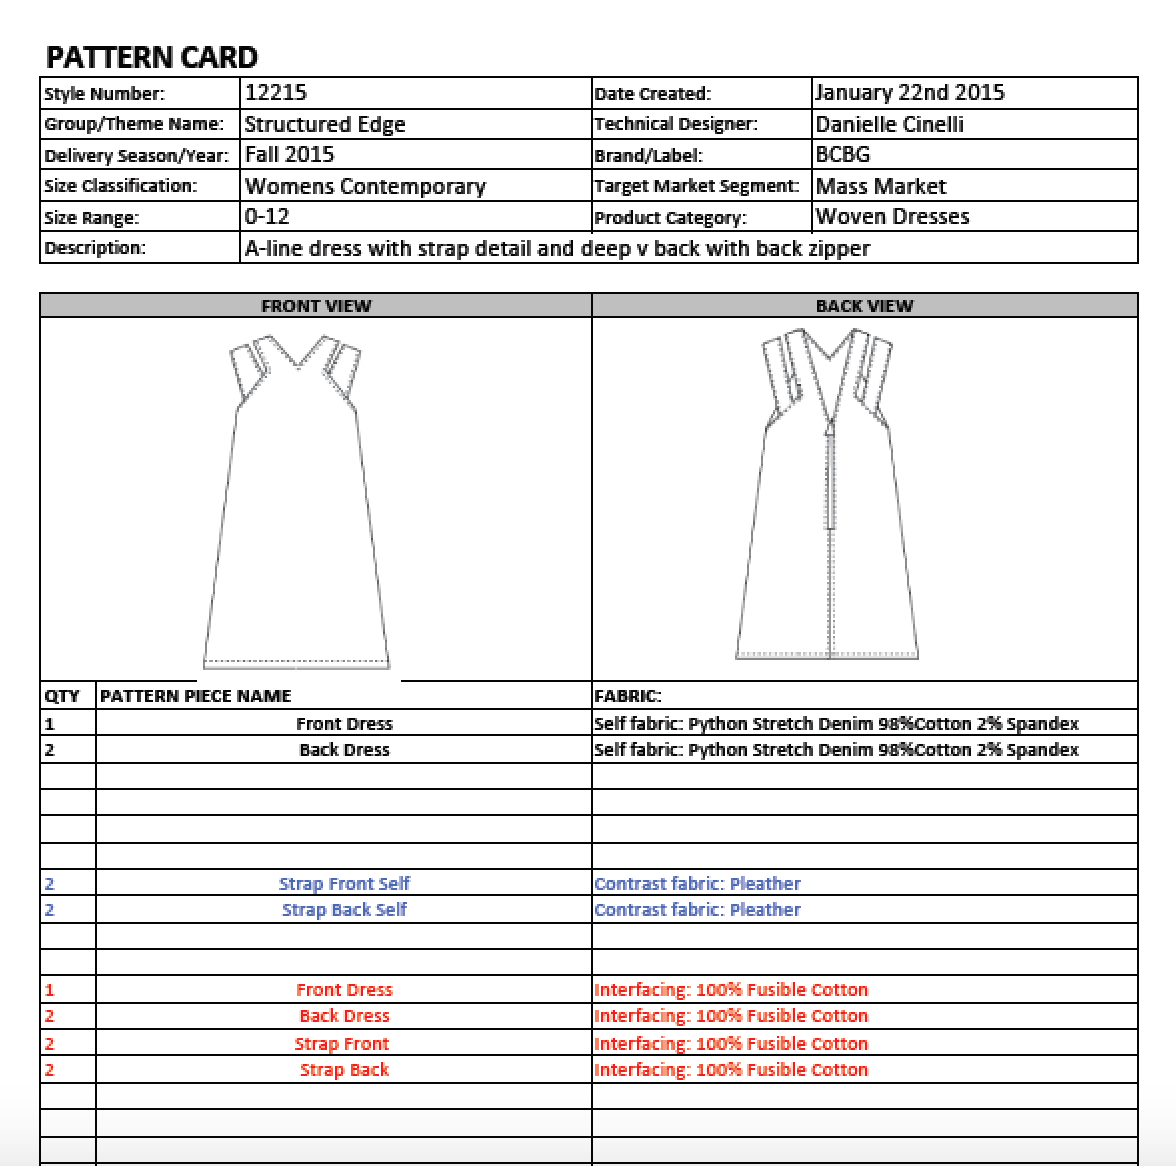 techpack sewn garment concepttocompletion sewing dress